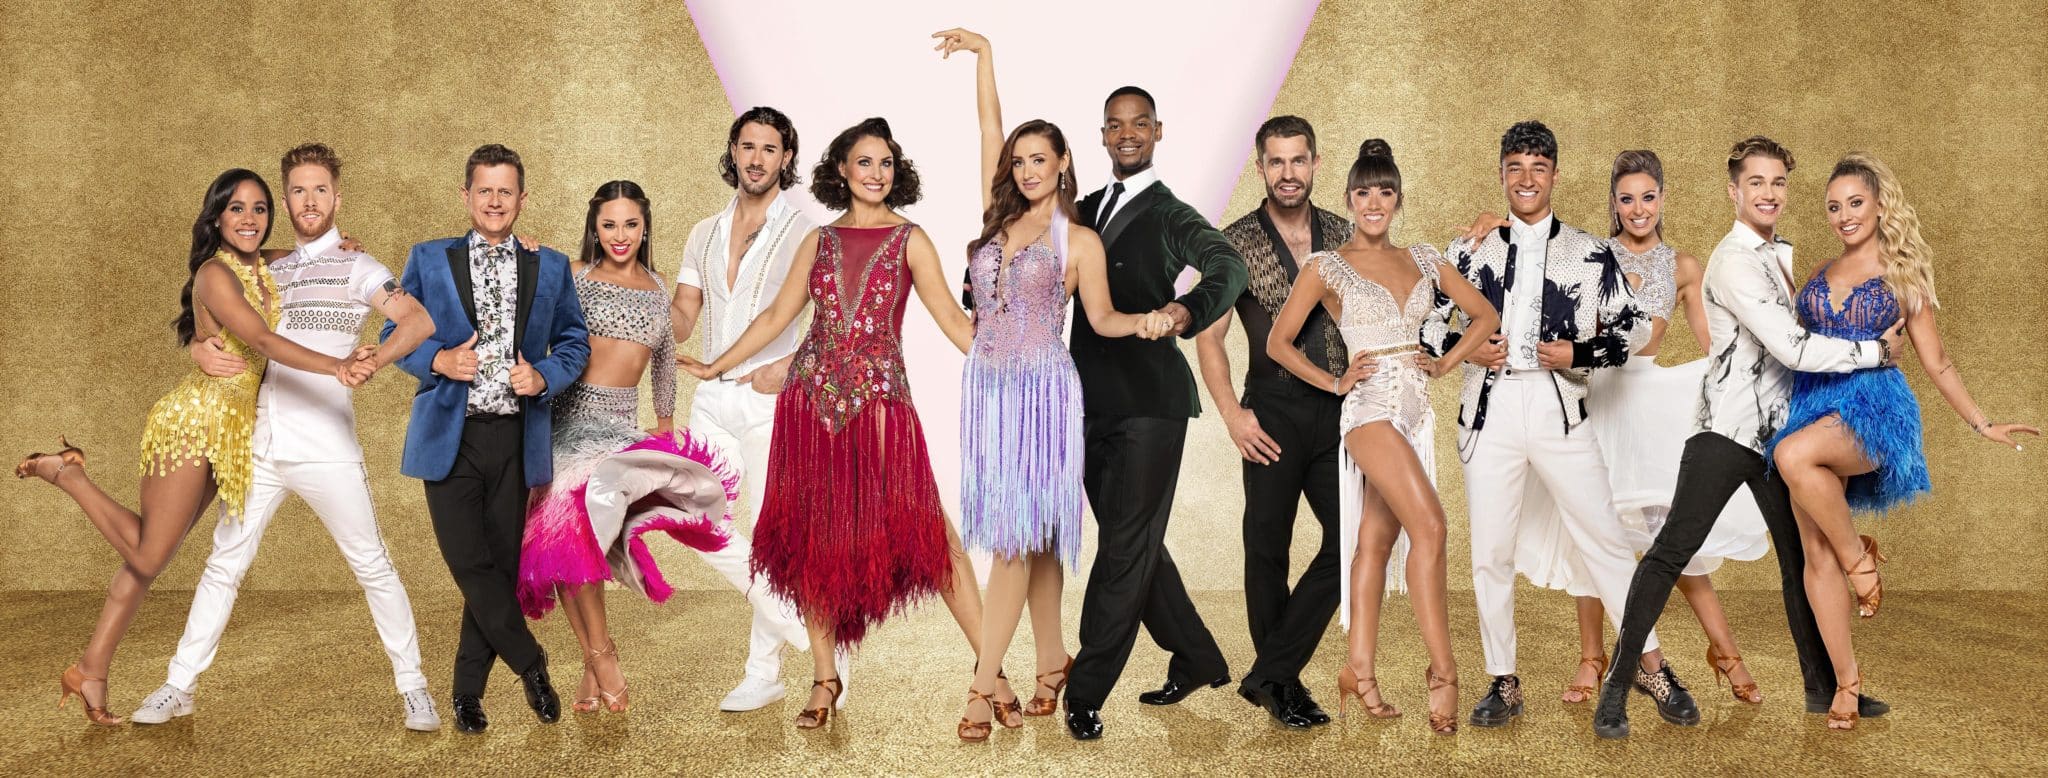 Strictly Come Dancing 2020 Tour Dates Tickets Ticketmaster Uk 